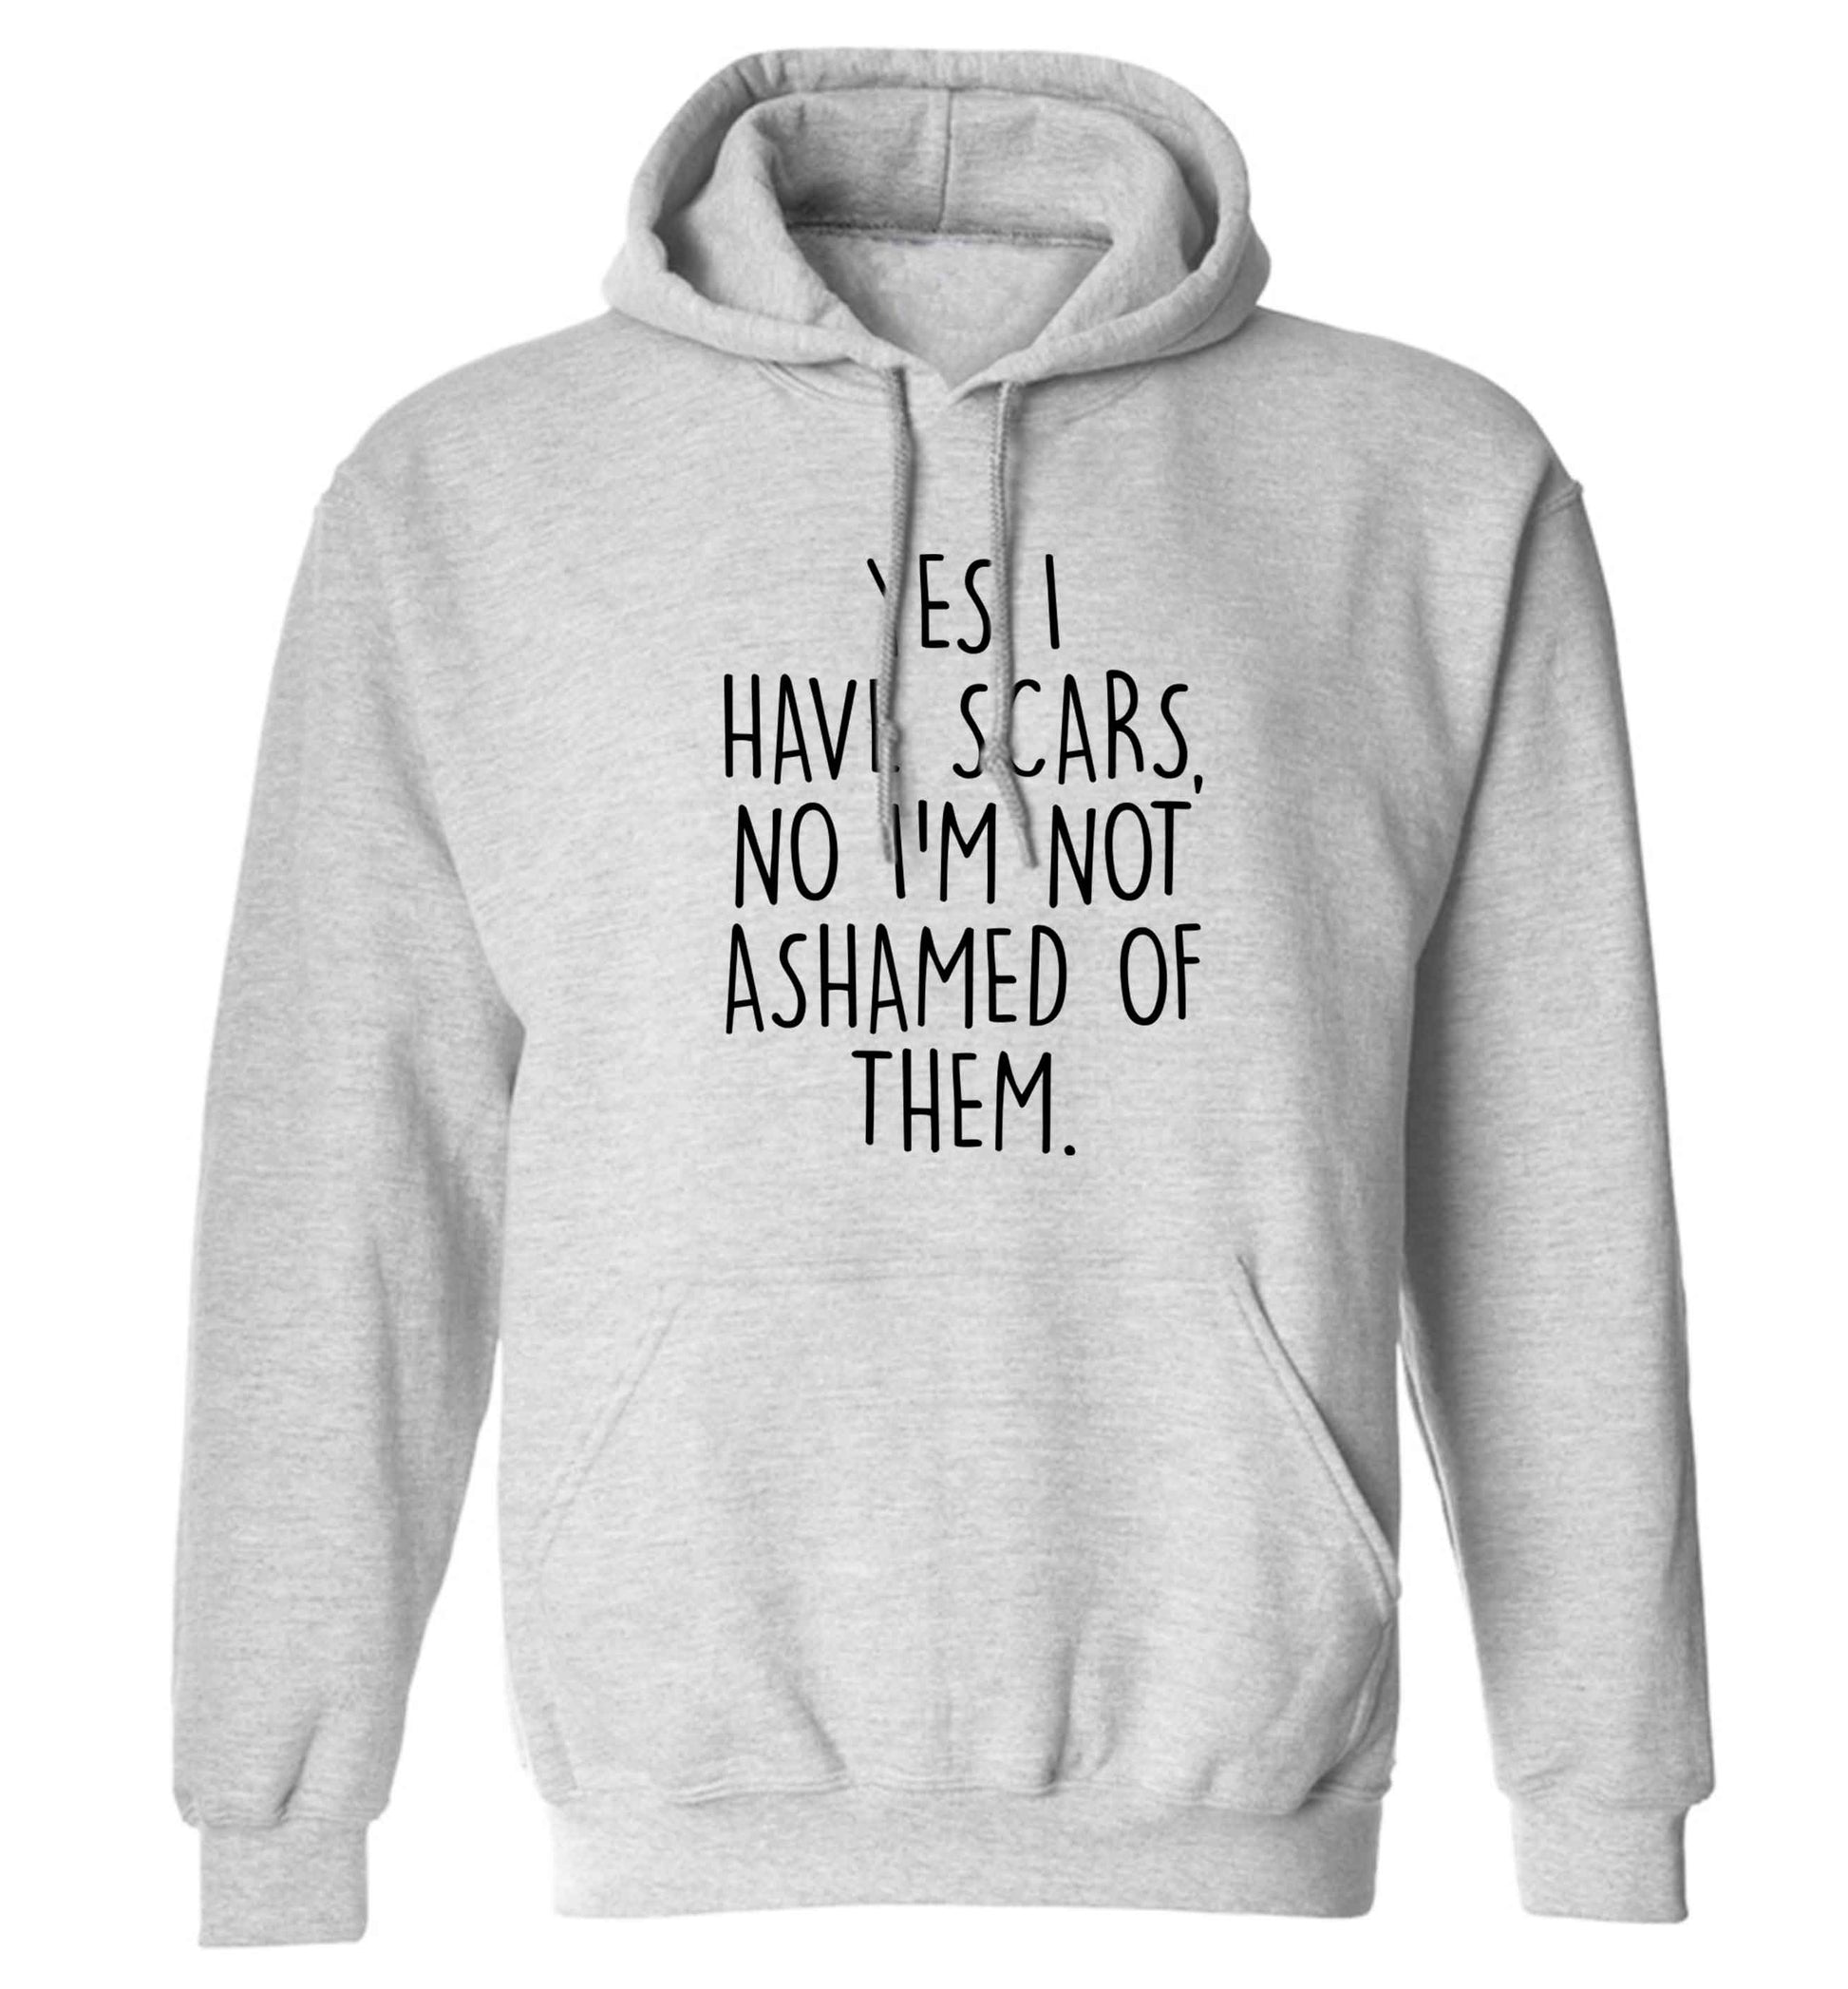 Yes I have scars, no I'm not ashamed of them adults unisex grey hoodie 2XL